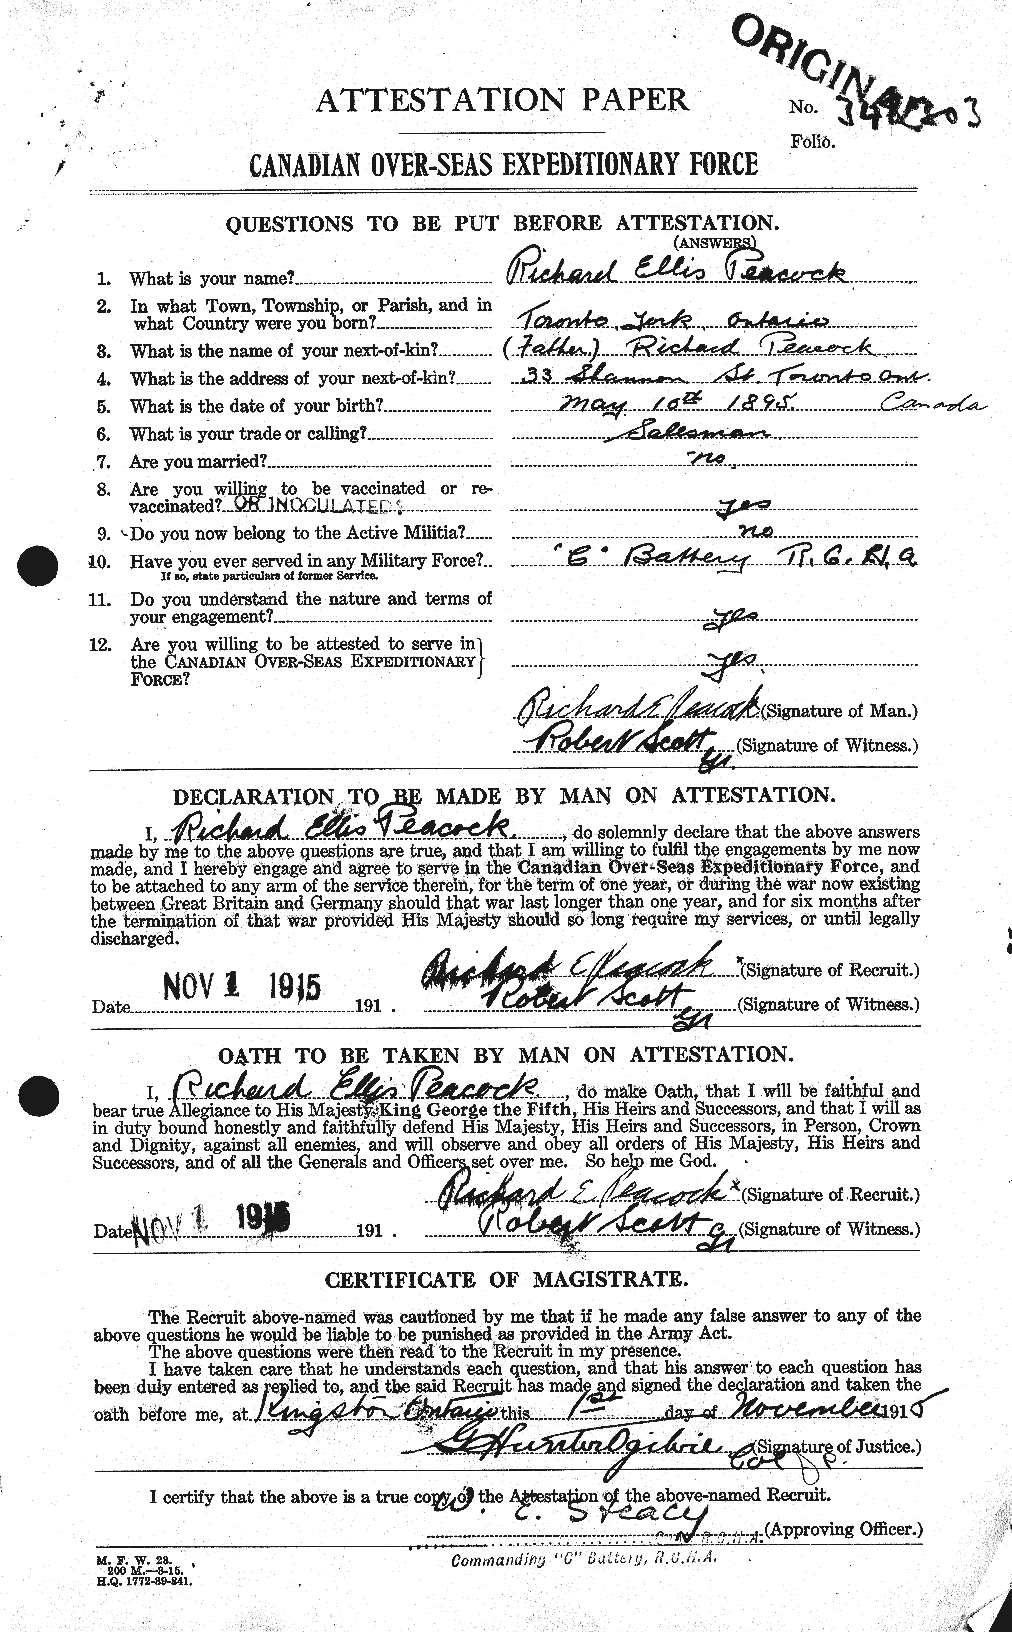 Personnel Records of the First World War - CEF 570399a